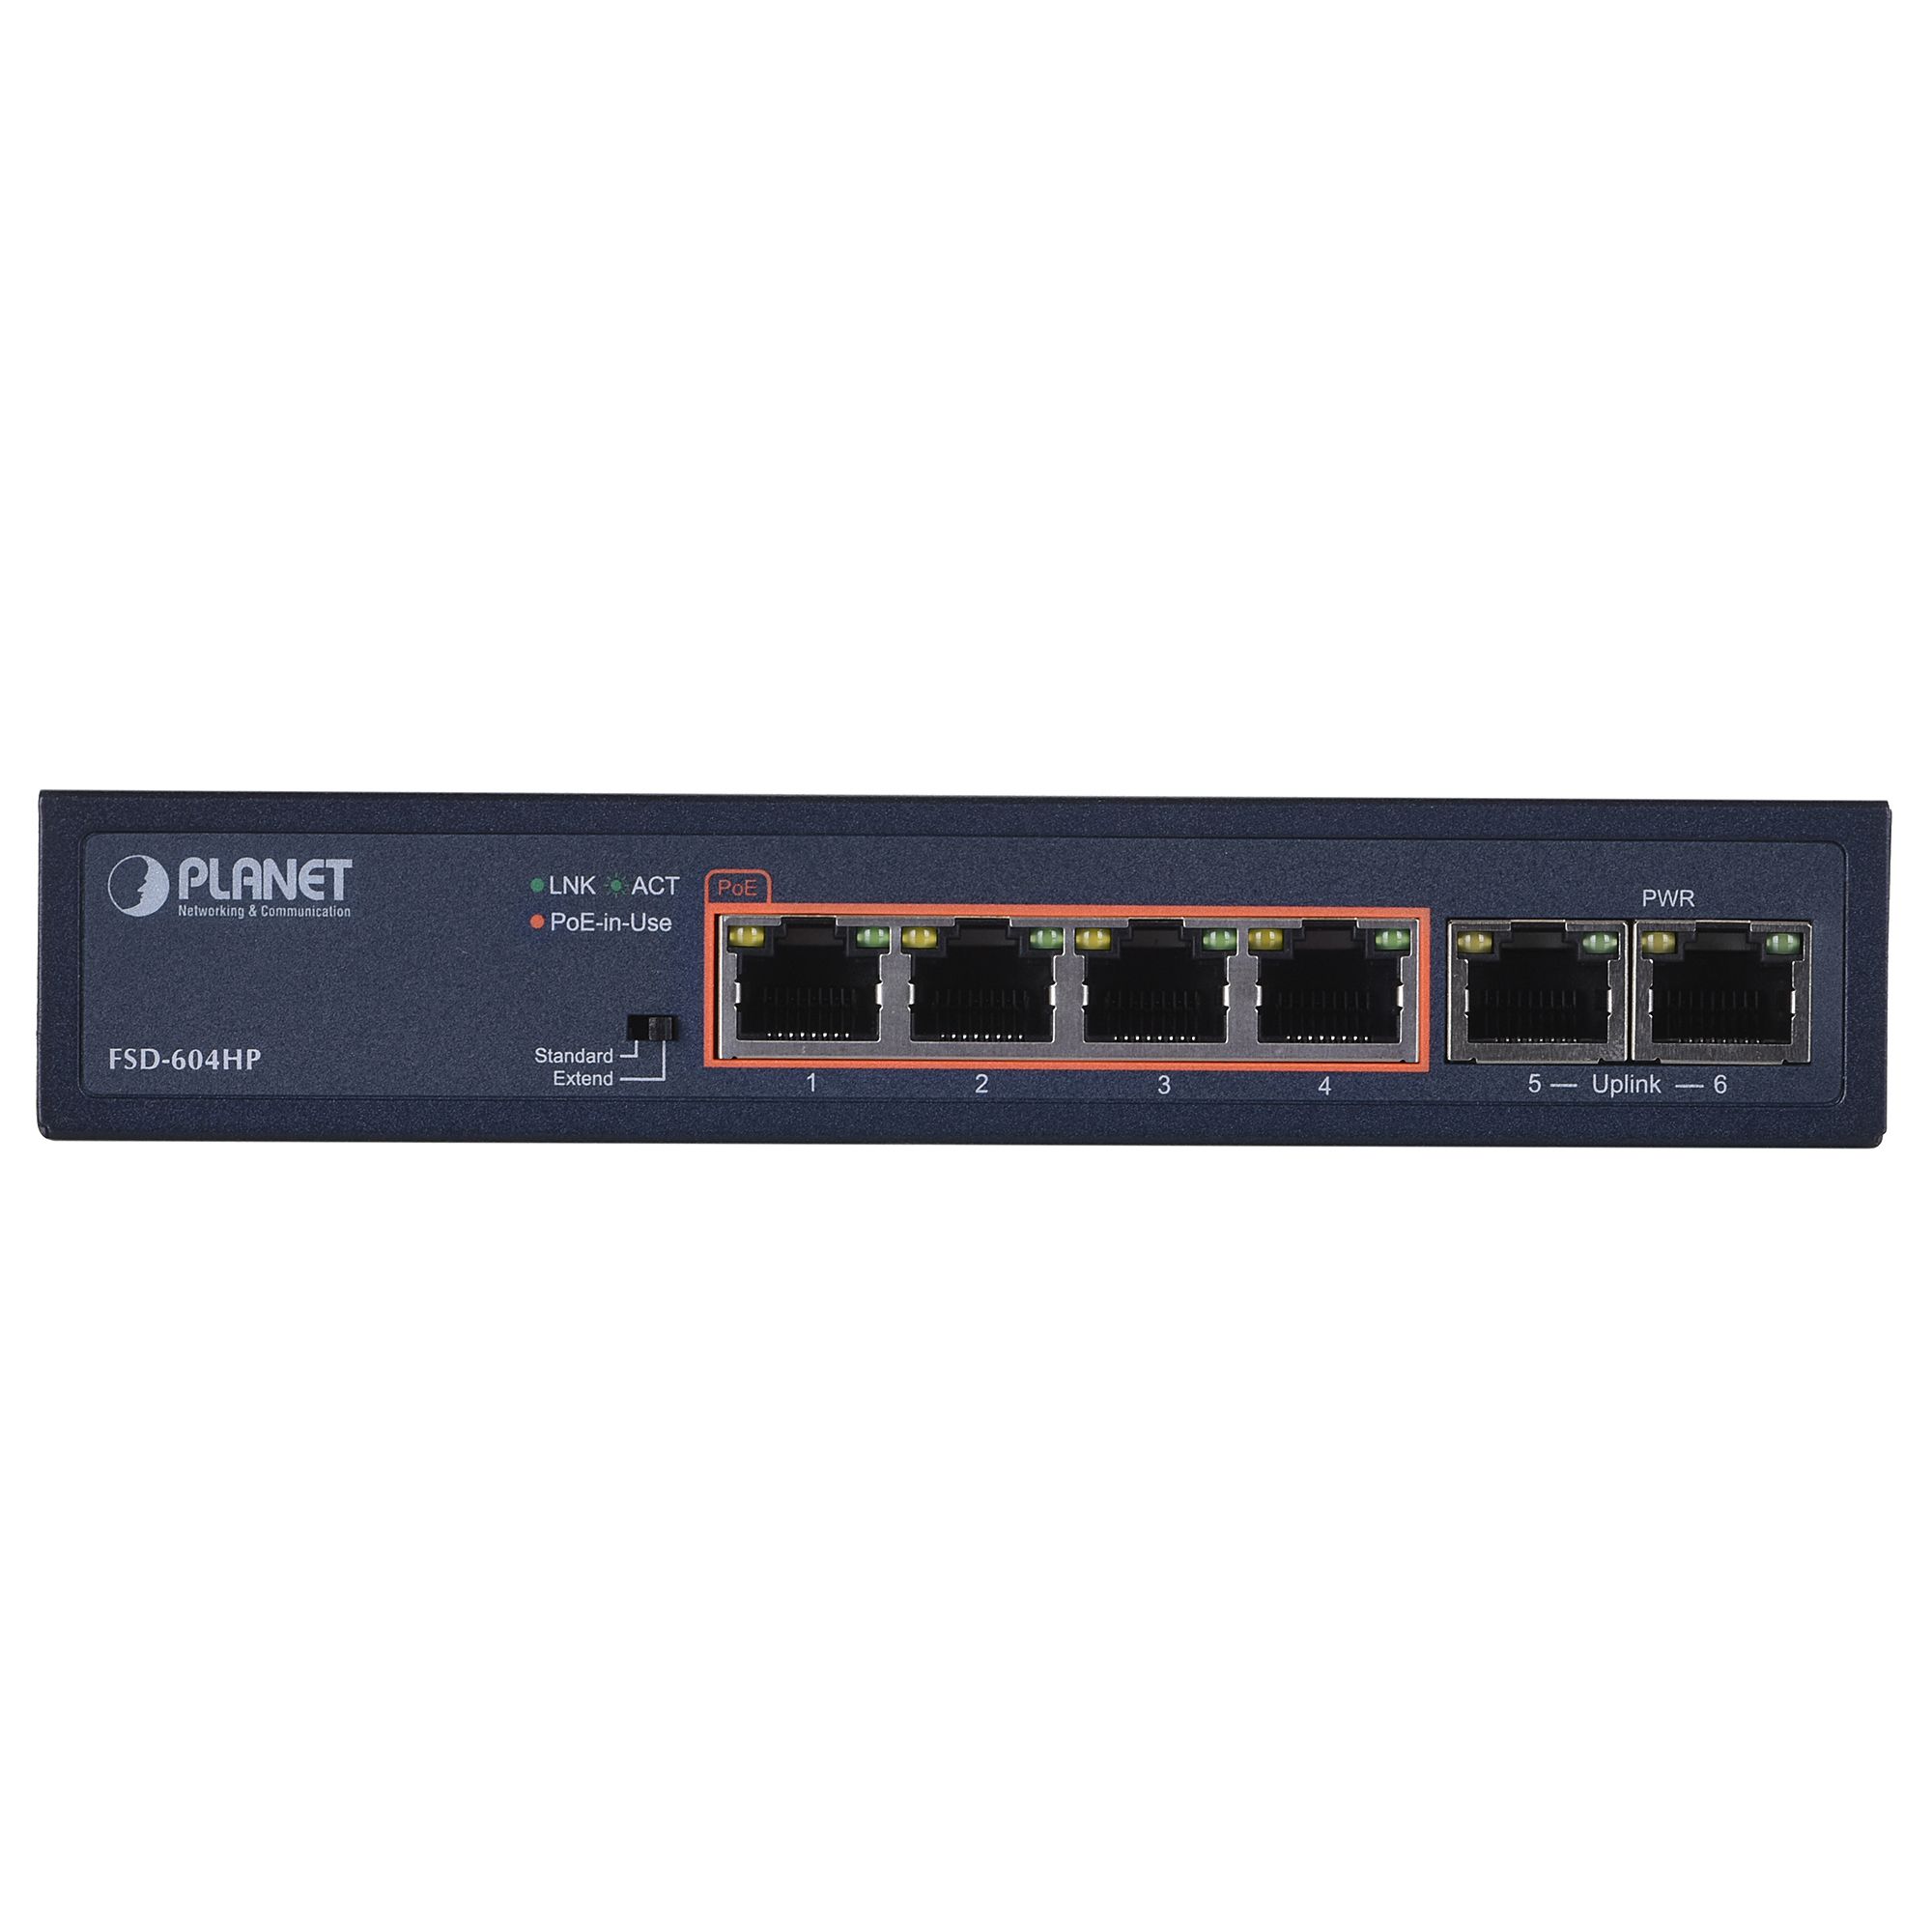 PLANET FSD-604HP network switch Unmanaged Fast Ethernet (10/100) Power over Ethernet (PoE) Blue_3